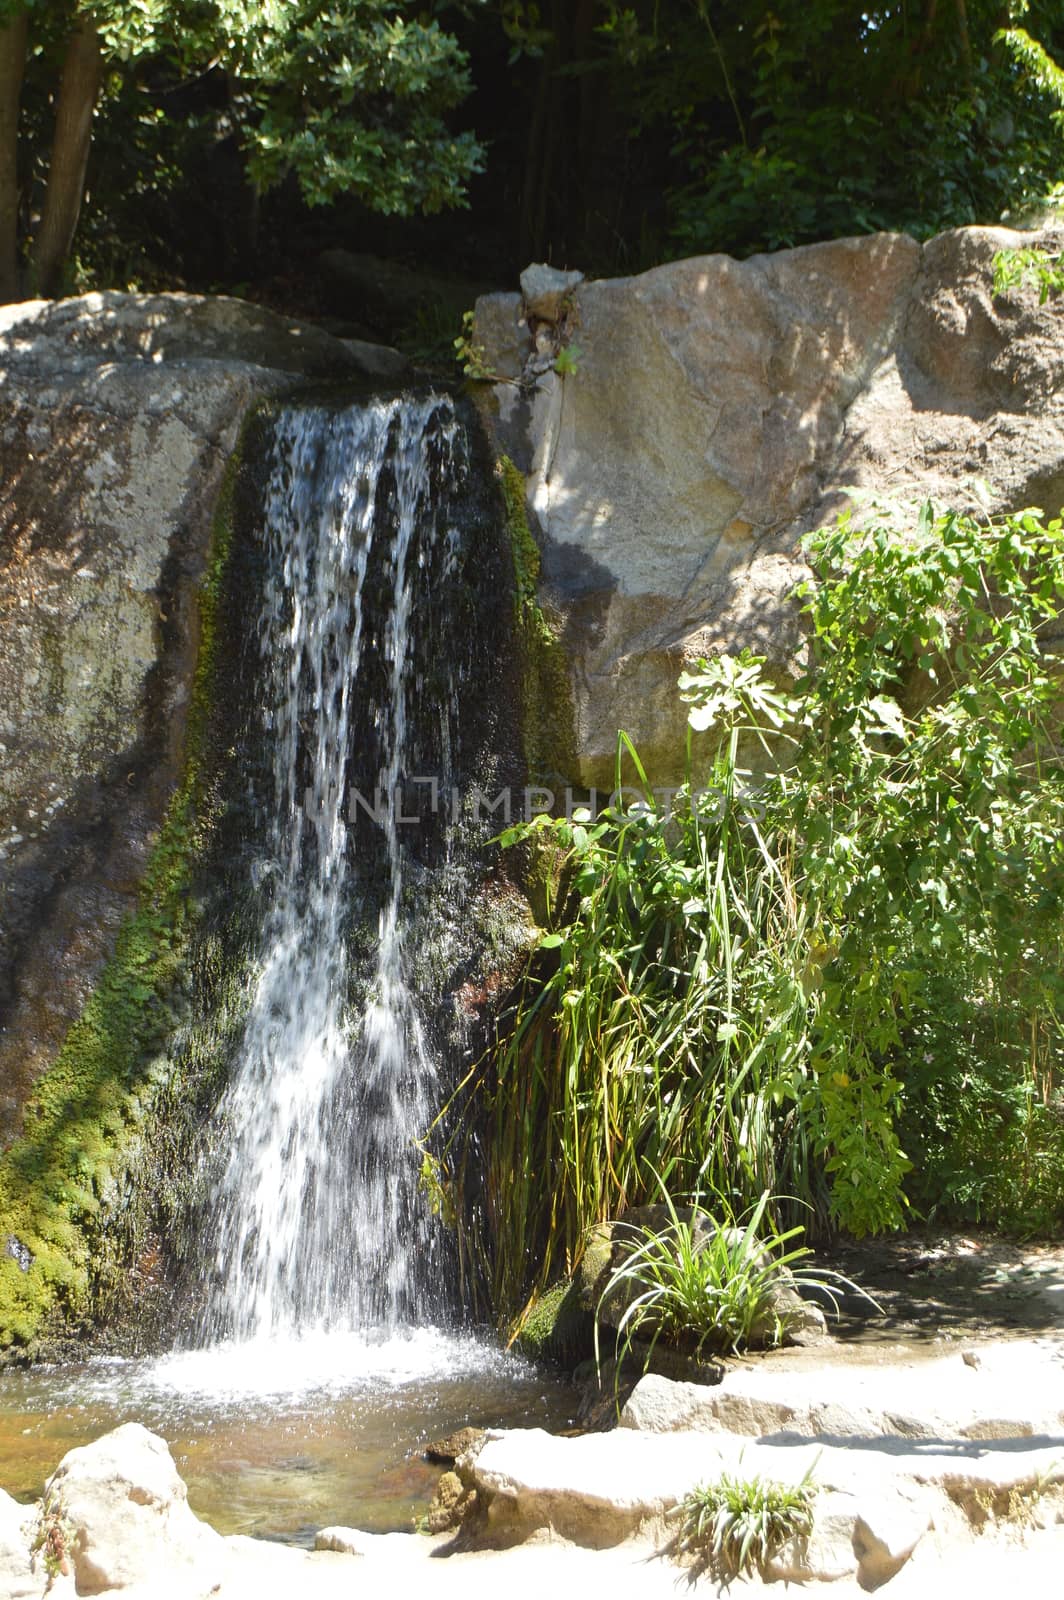 The waterfall flows down from the stones overgrown with plants in the summer natural Park.